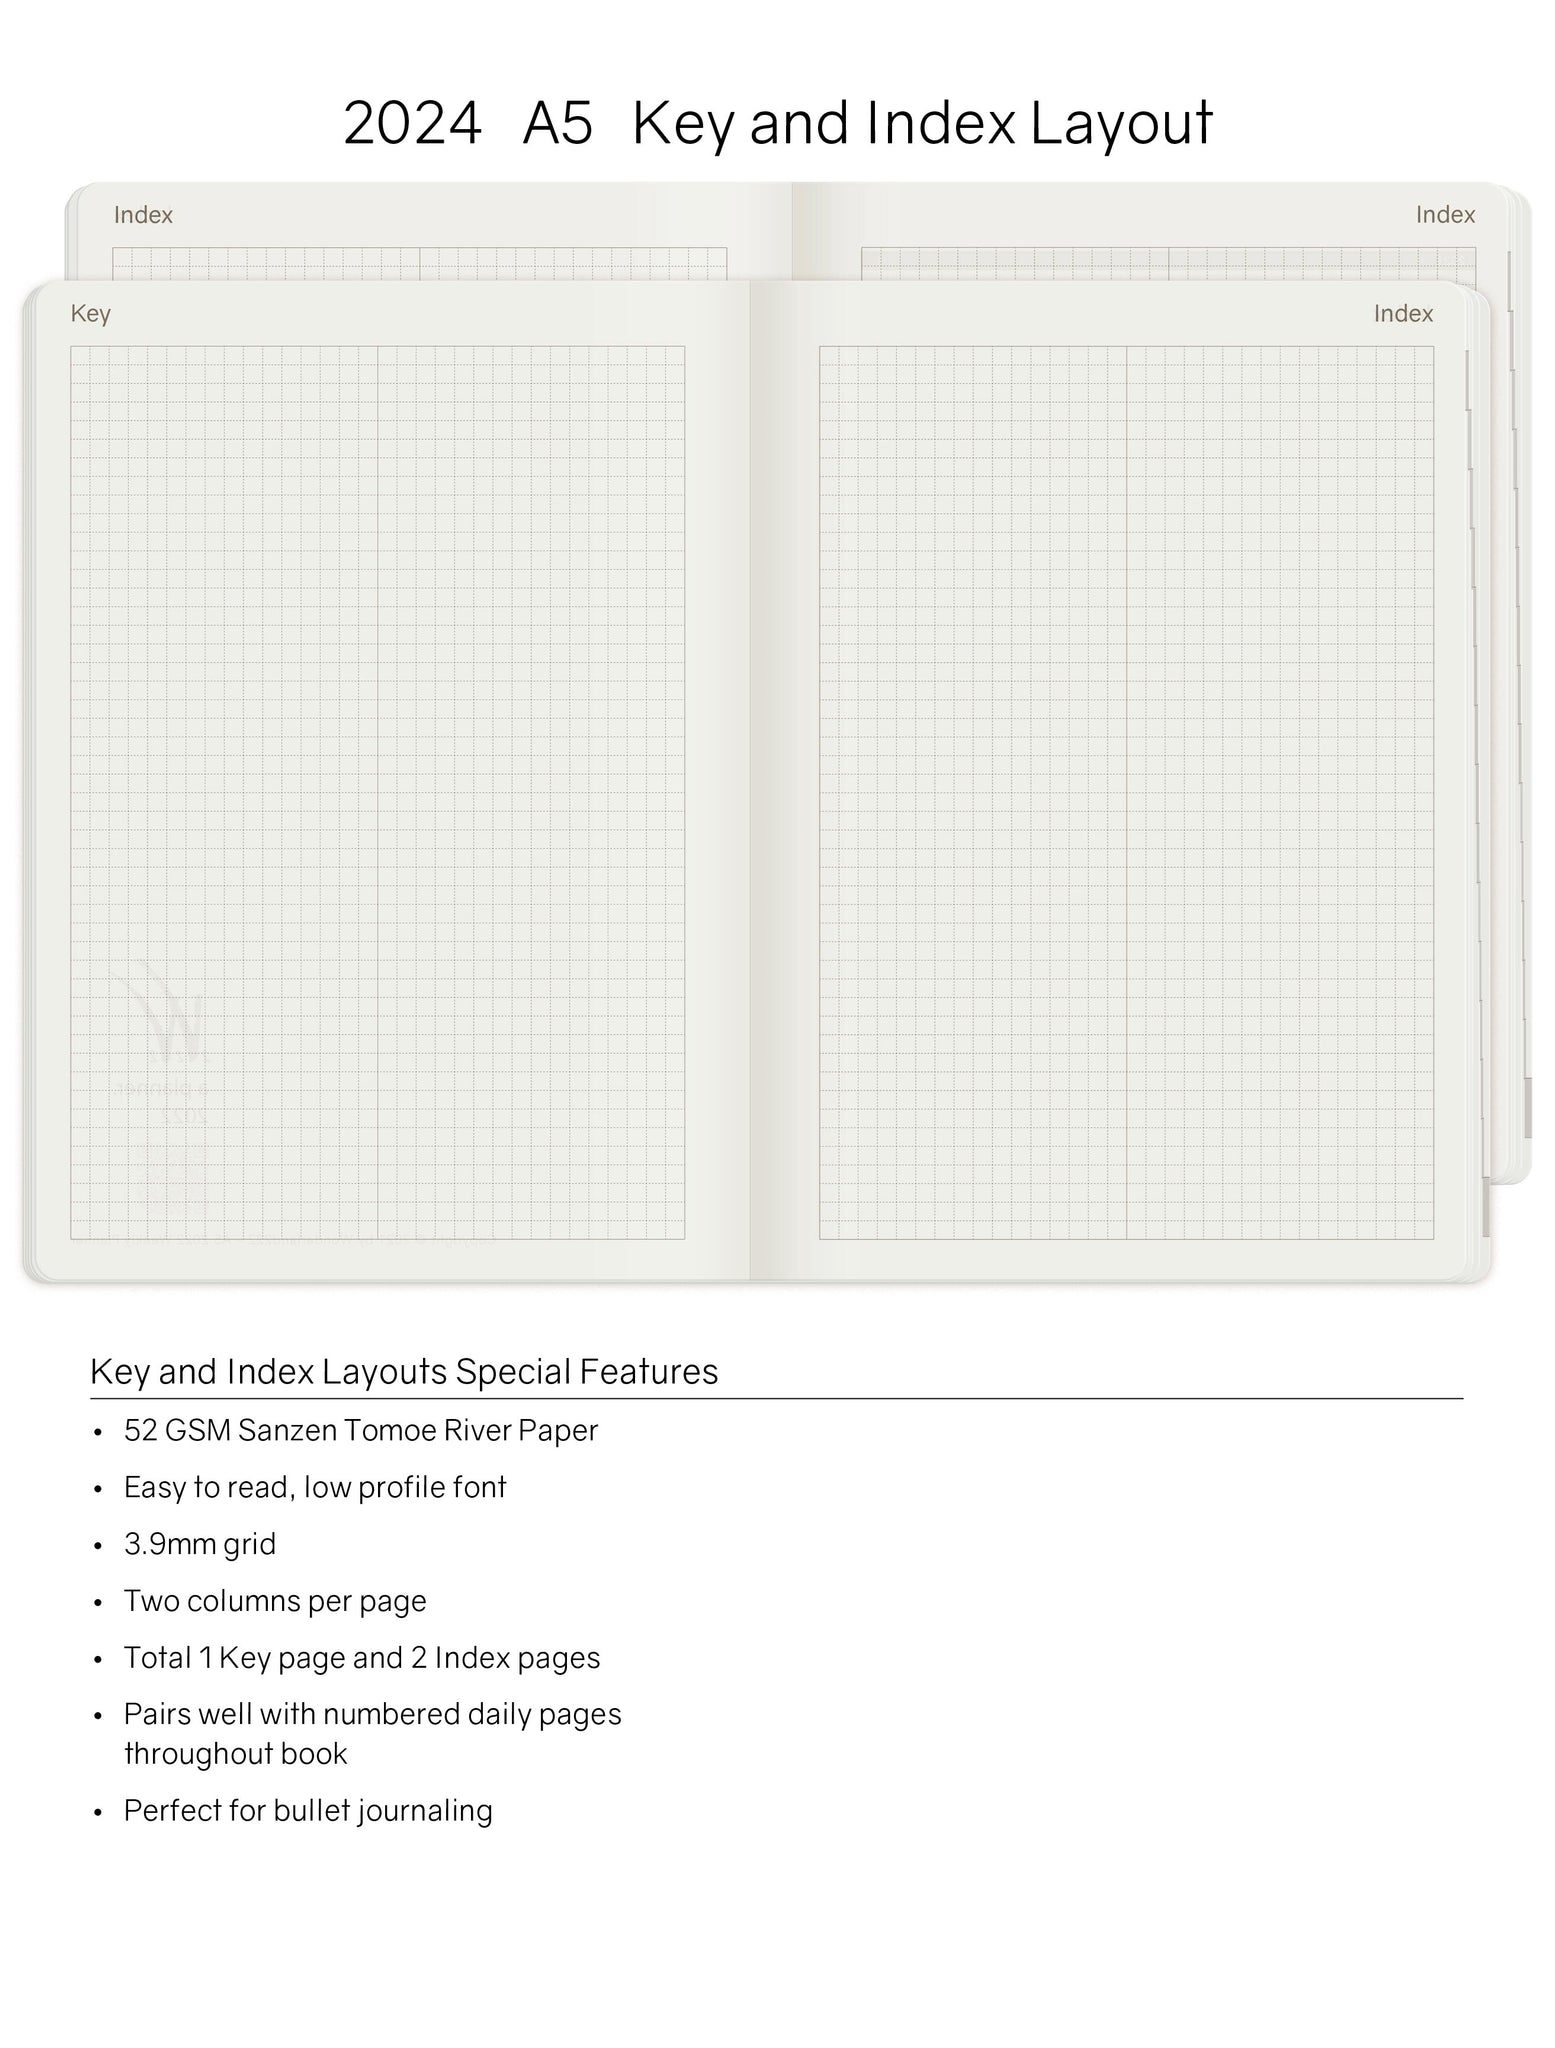 2024 A5 Weekly Planner - 52gsm Tomoe River Paper (Stacked Weekends)